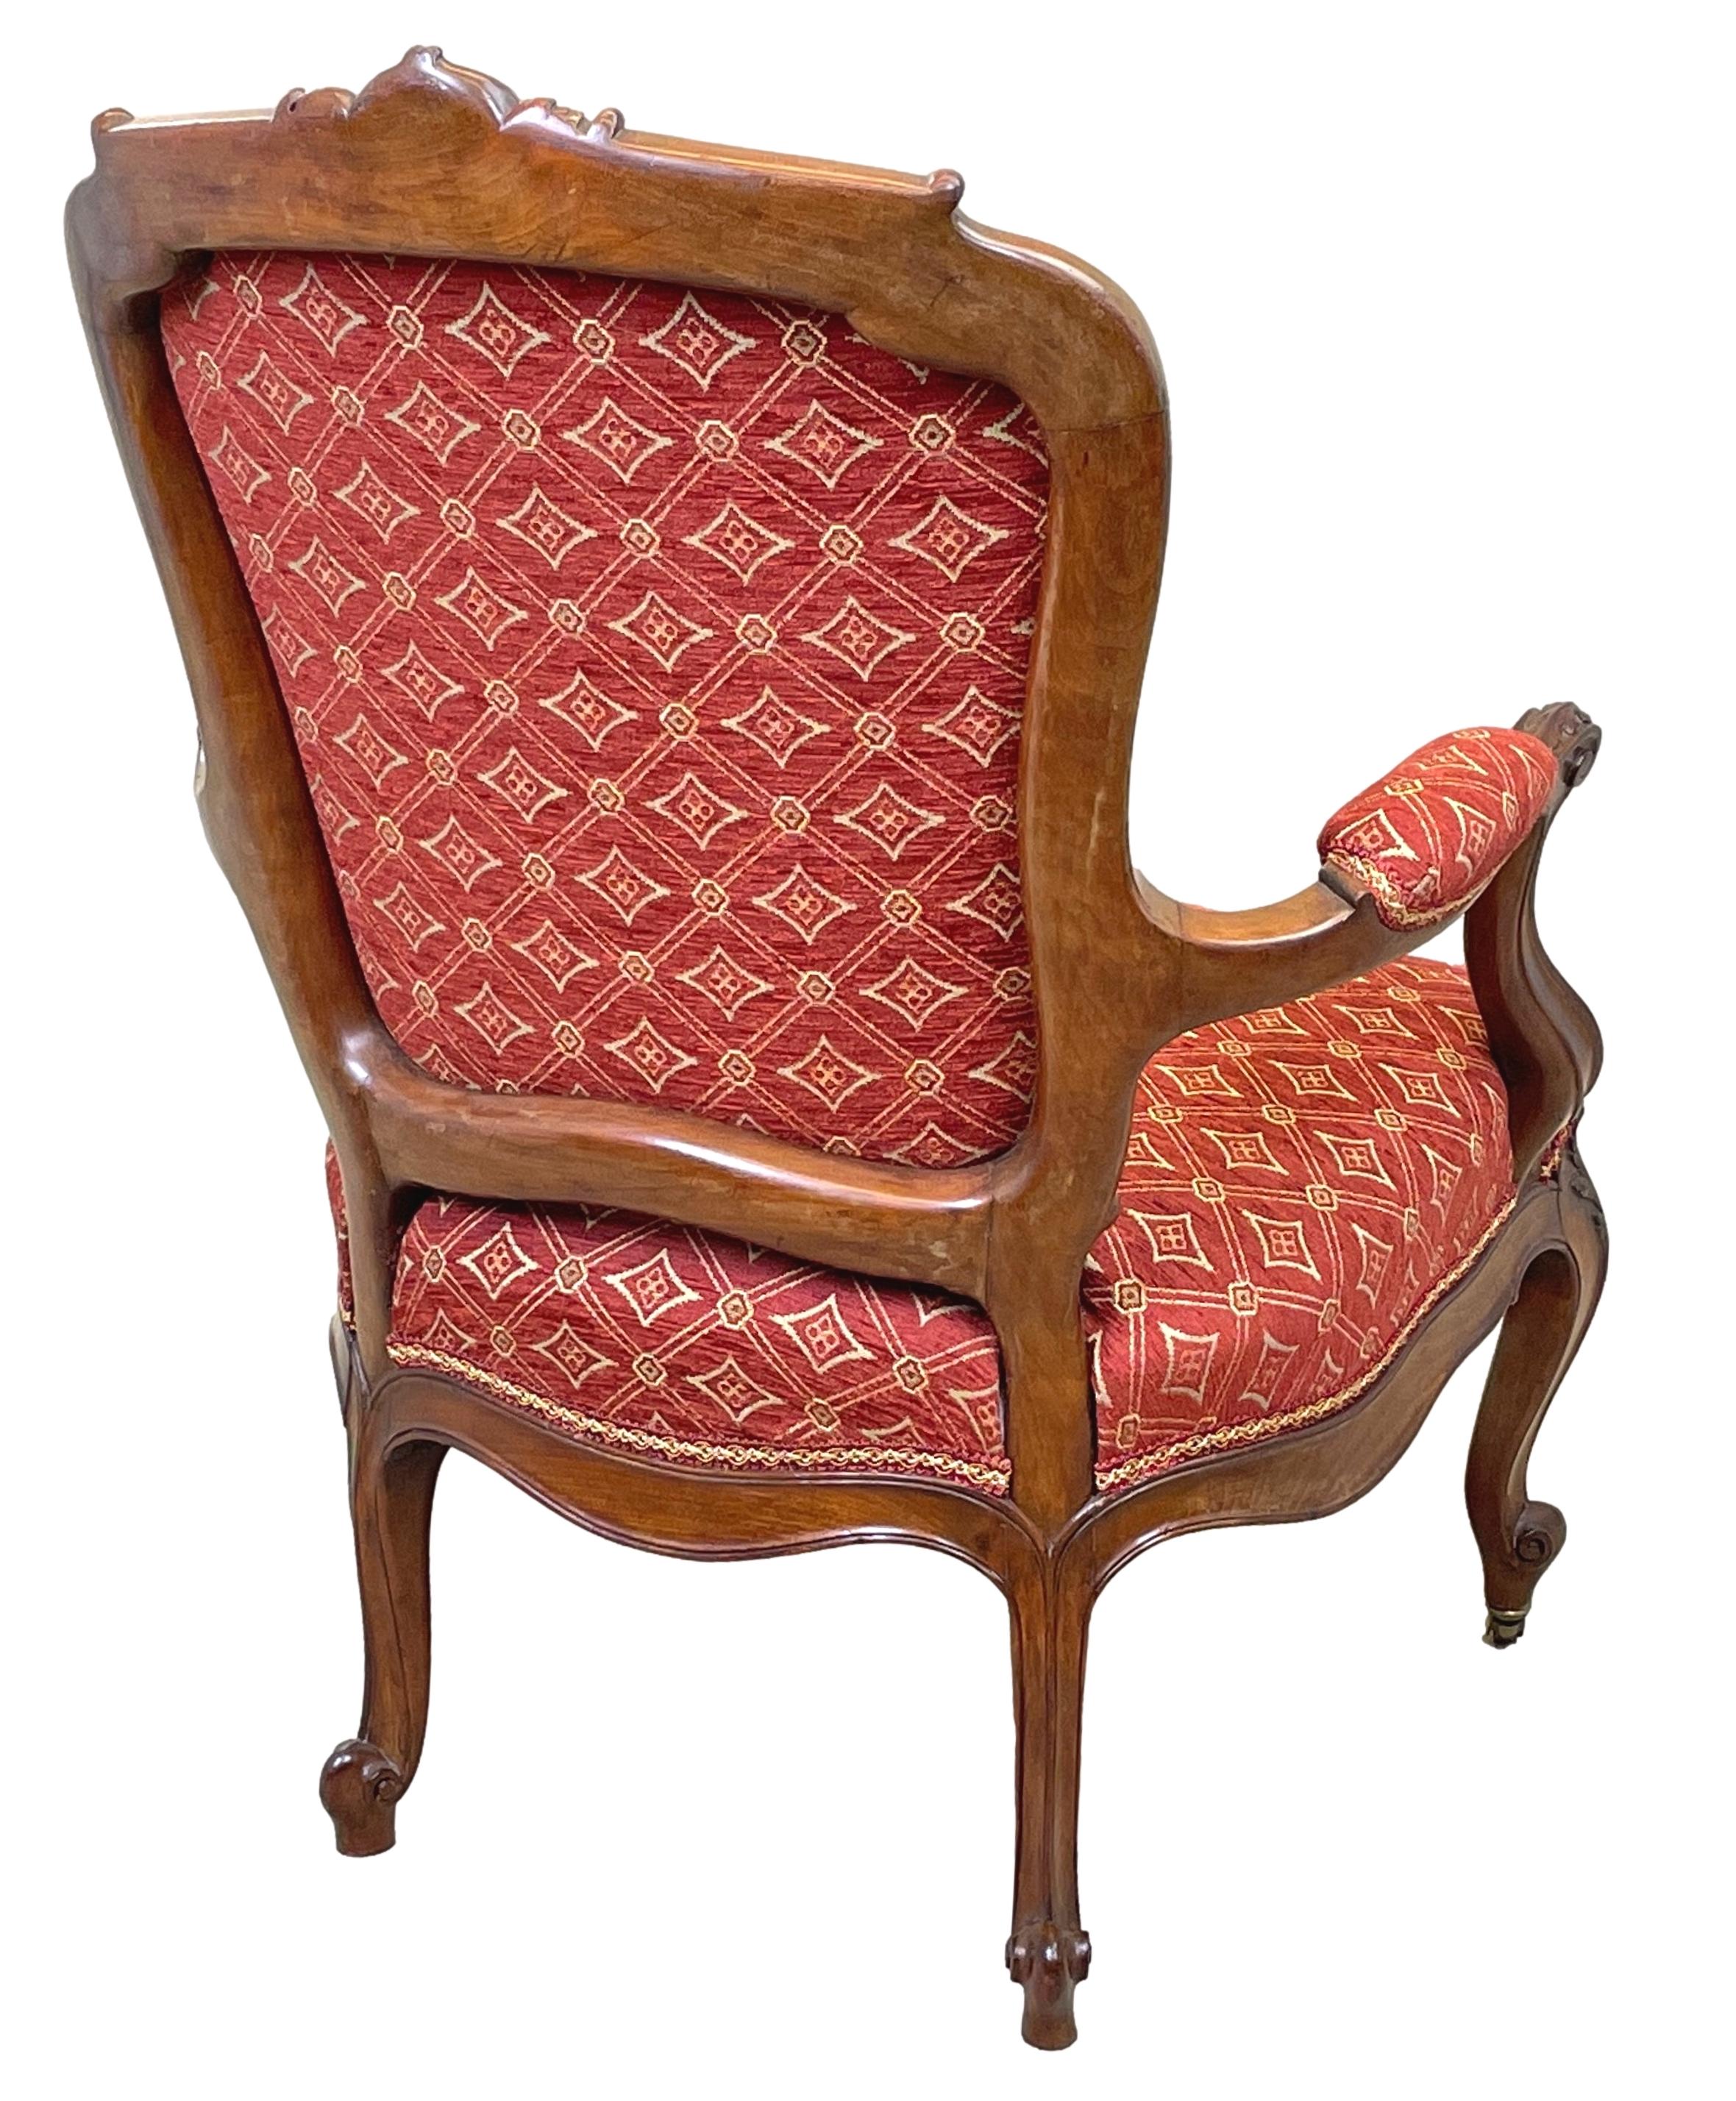 A very good quality mid 19th century English mahogany library armchair, in the French hepplewhite style, having central set carved cartouche to top rail over upholstered back and seat with elegant carved scrolling arms raised on moulded & carved